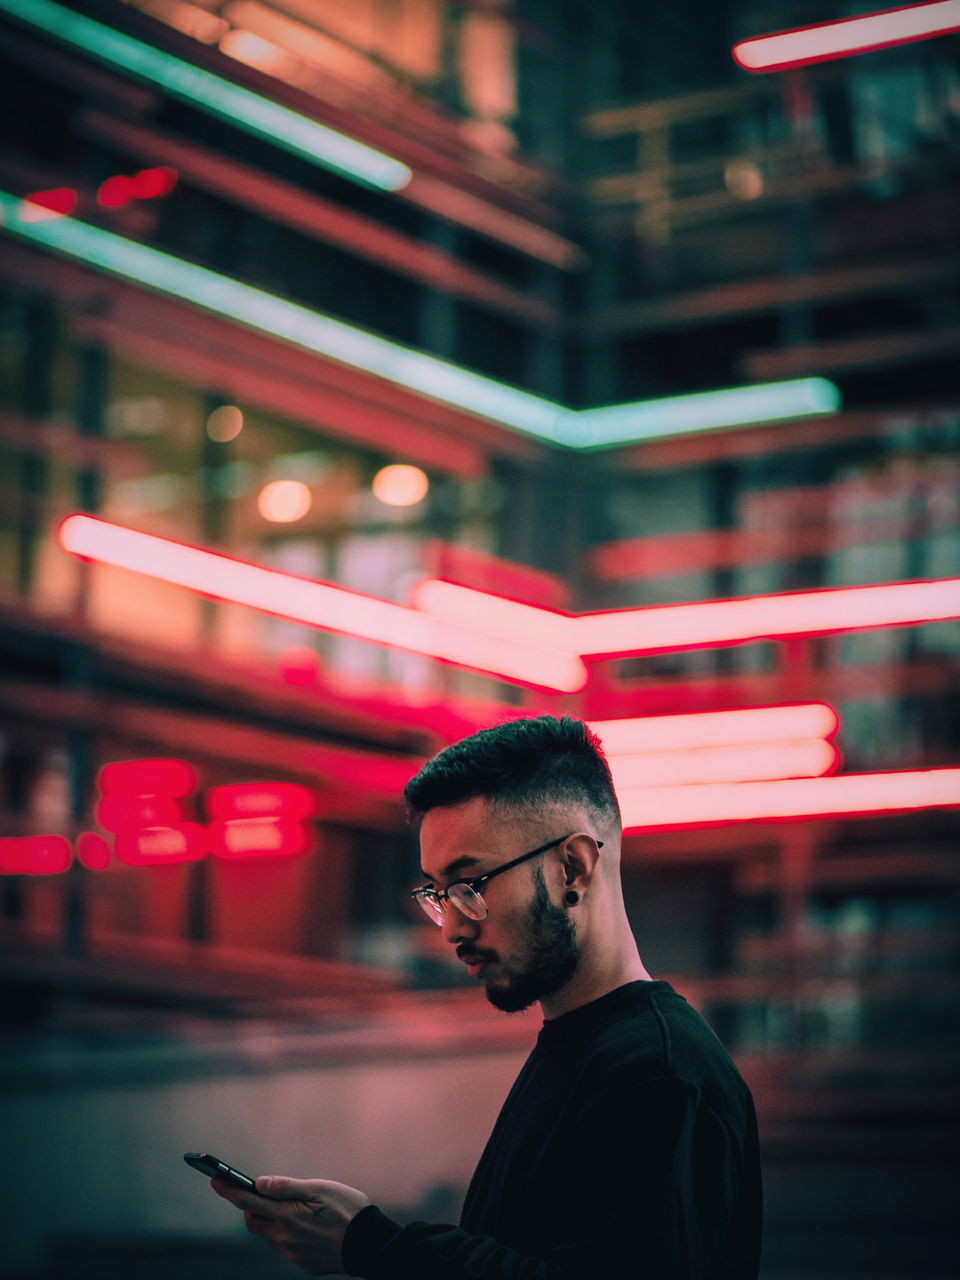 one person, real people, young adult, eyeglasses, illuminated, young men, focus on foreground, technology, lifestyles, wireless technology, night, indoors, people